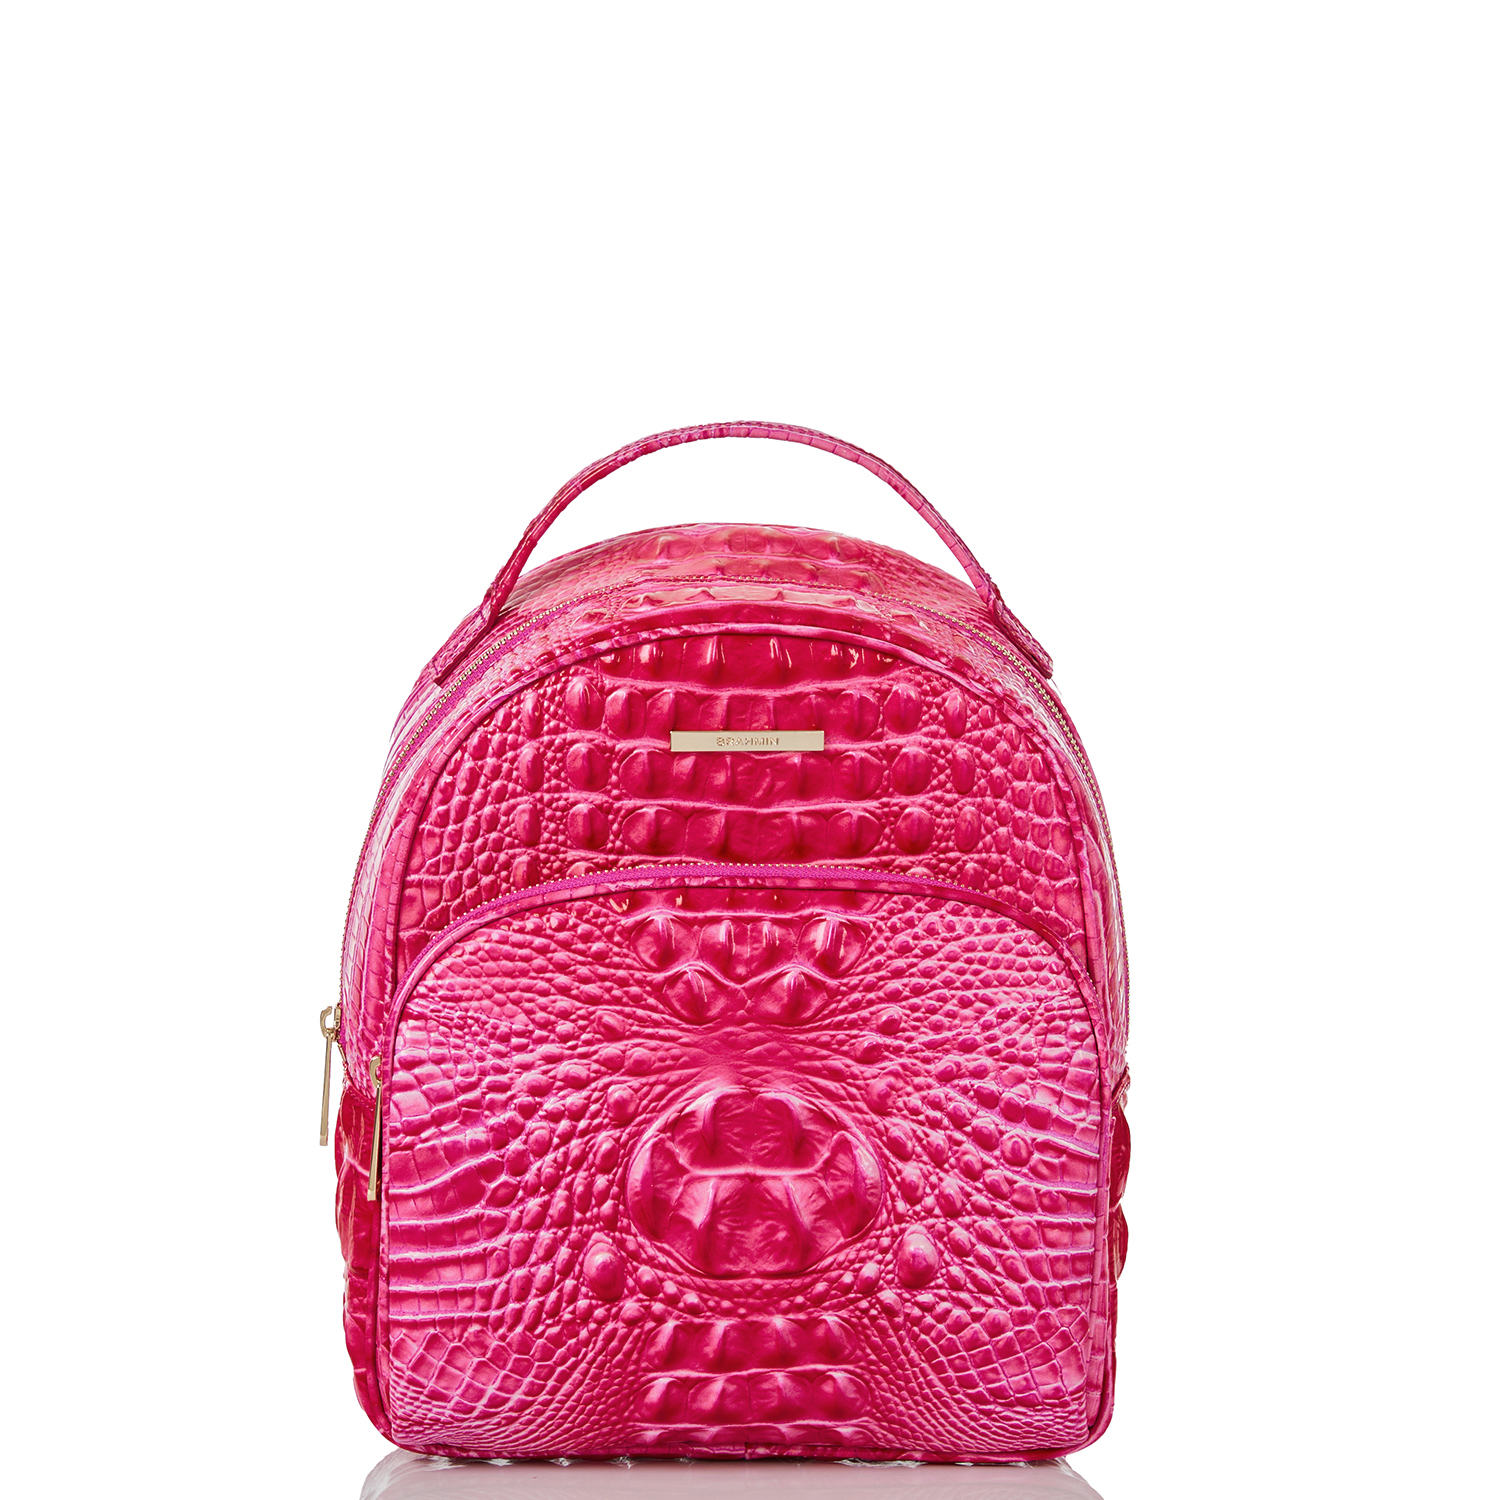 BRAHMIN CHELCY PINK COSMO MELBOURNE